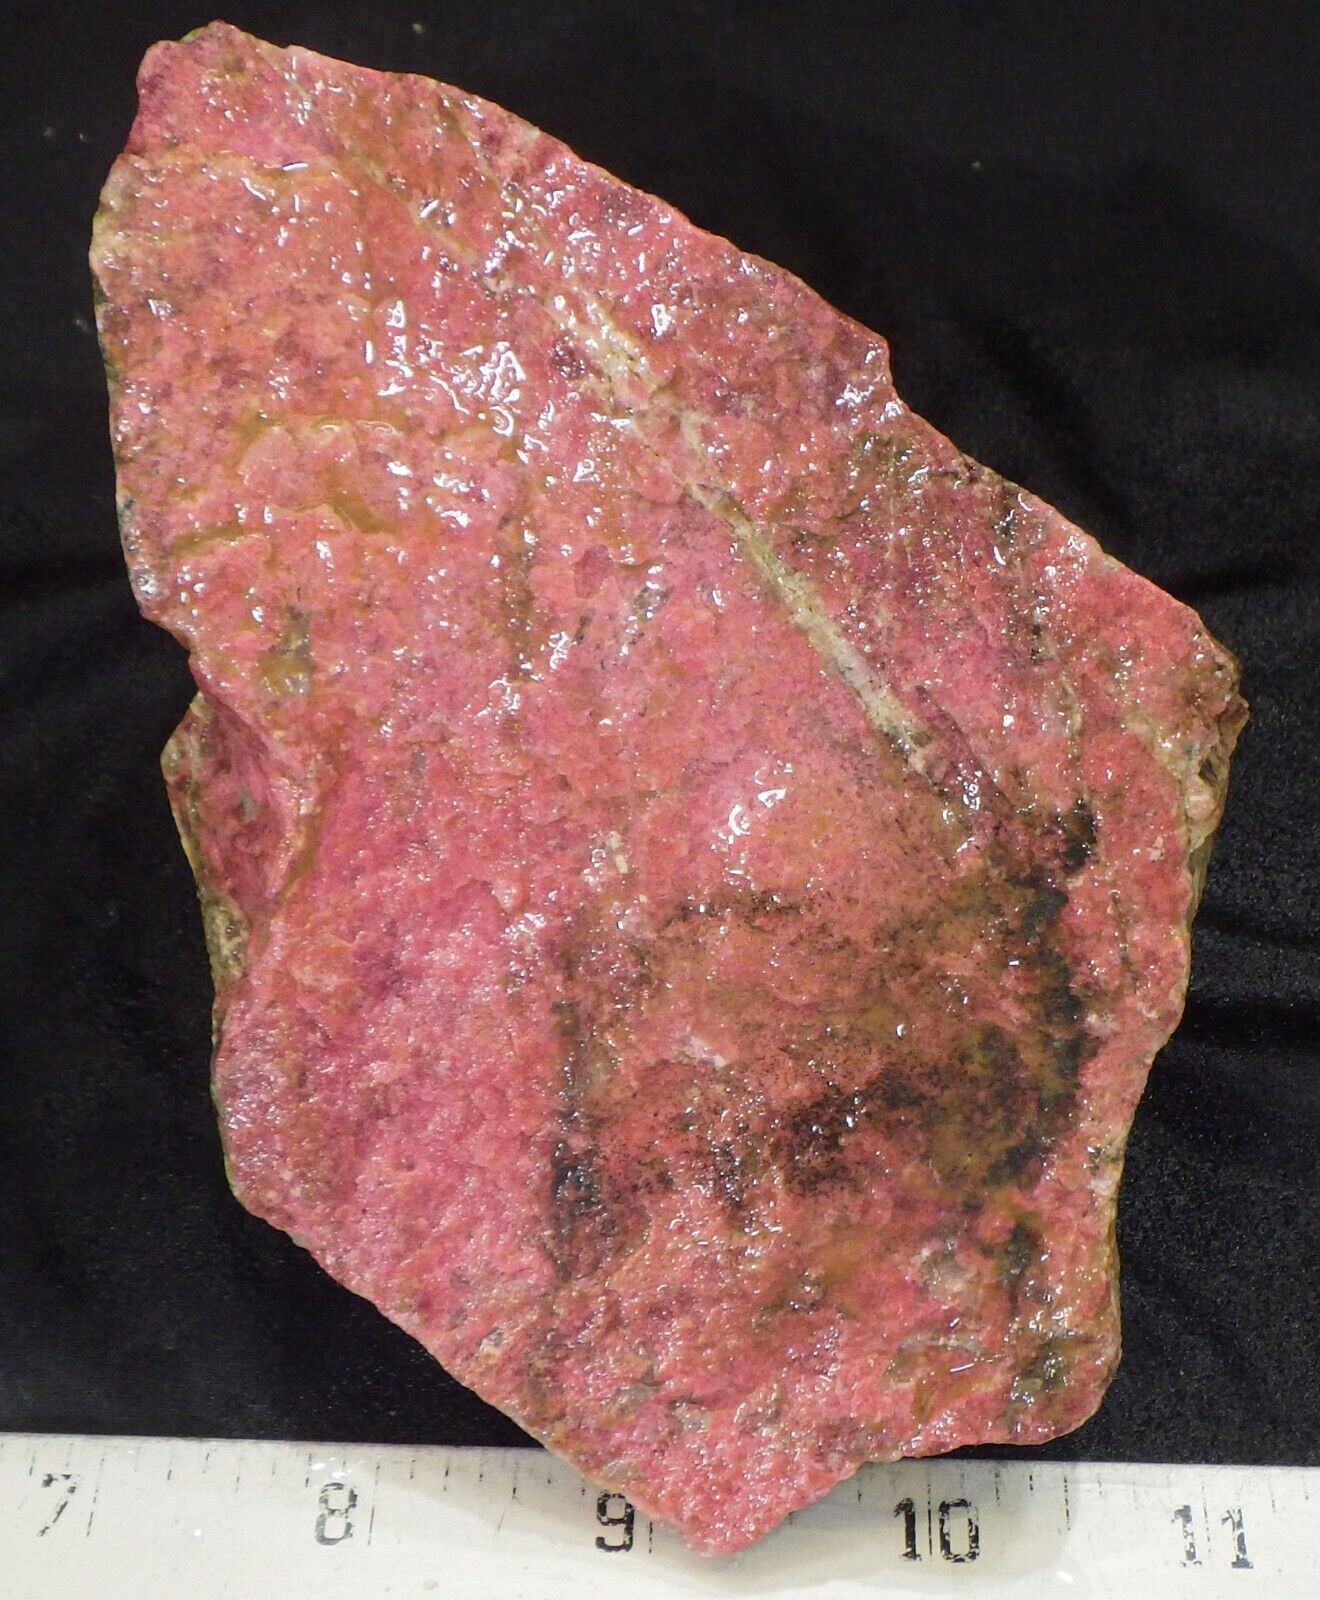 rm69 - THULITE - Norway - 2.9 lbs - FREE USA SHIPPING #1829